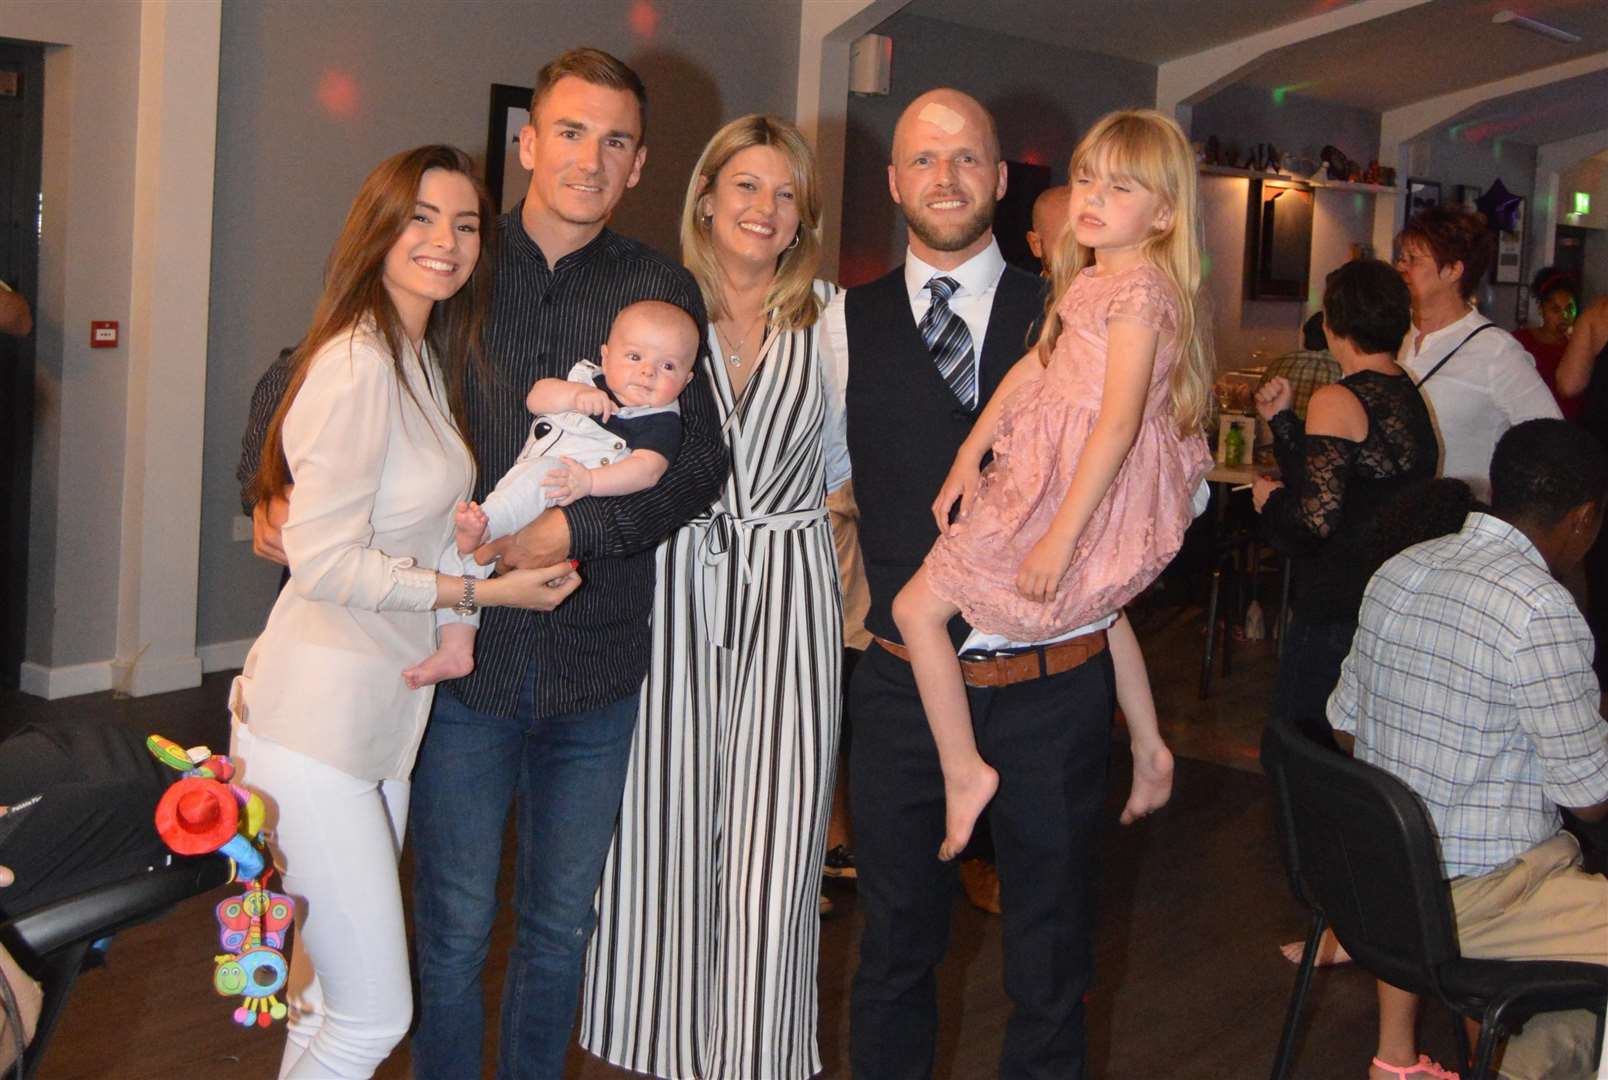 Footballer Jed Wallace, his partner Abbie and baby Luca joined the Barr family at the appreciation party in June